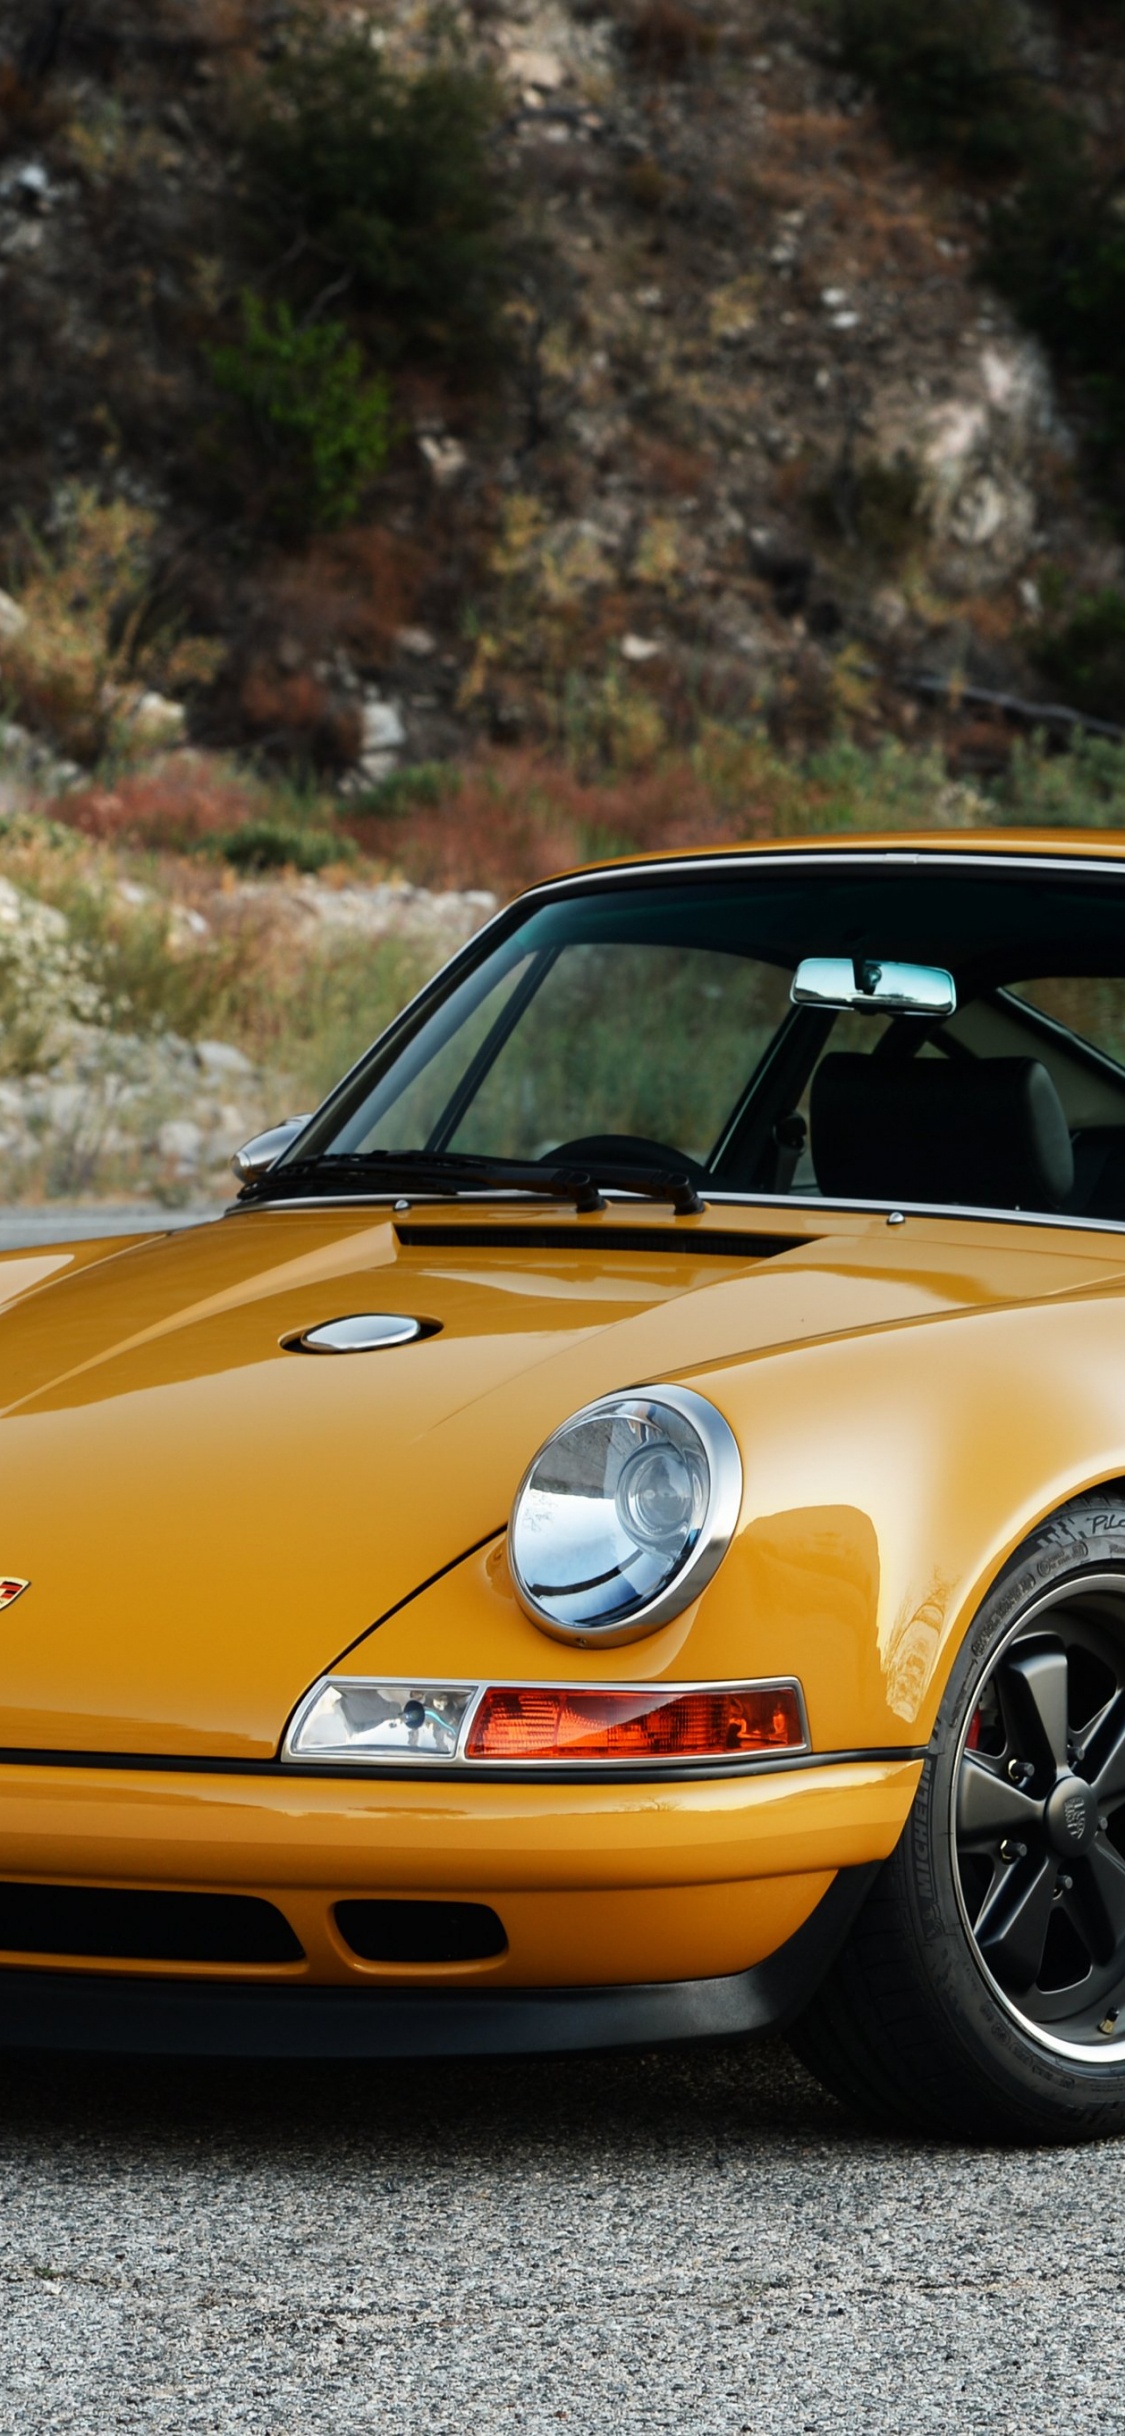 Yellow Porsche 911 on Road During Daytime. Wallpaper in 1125x2436 Resolution